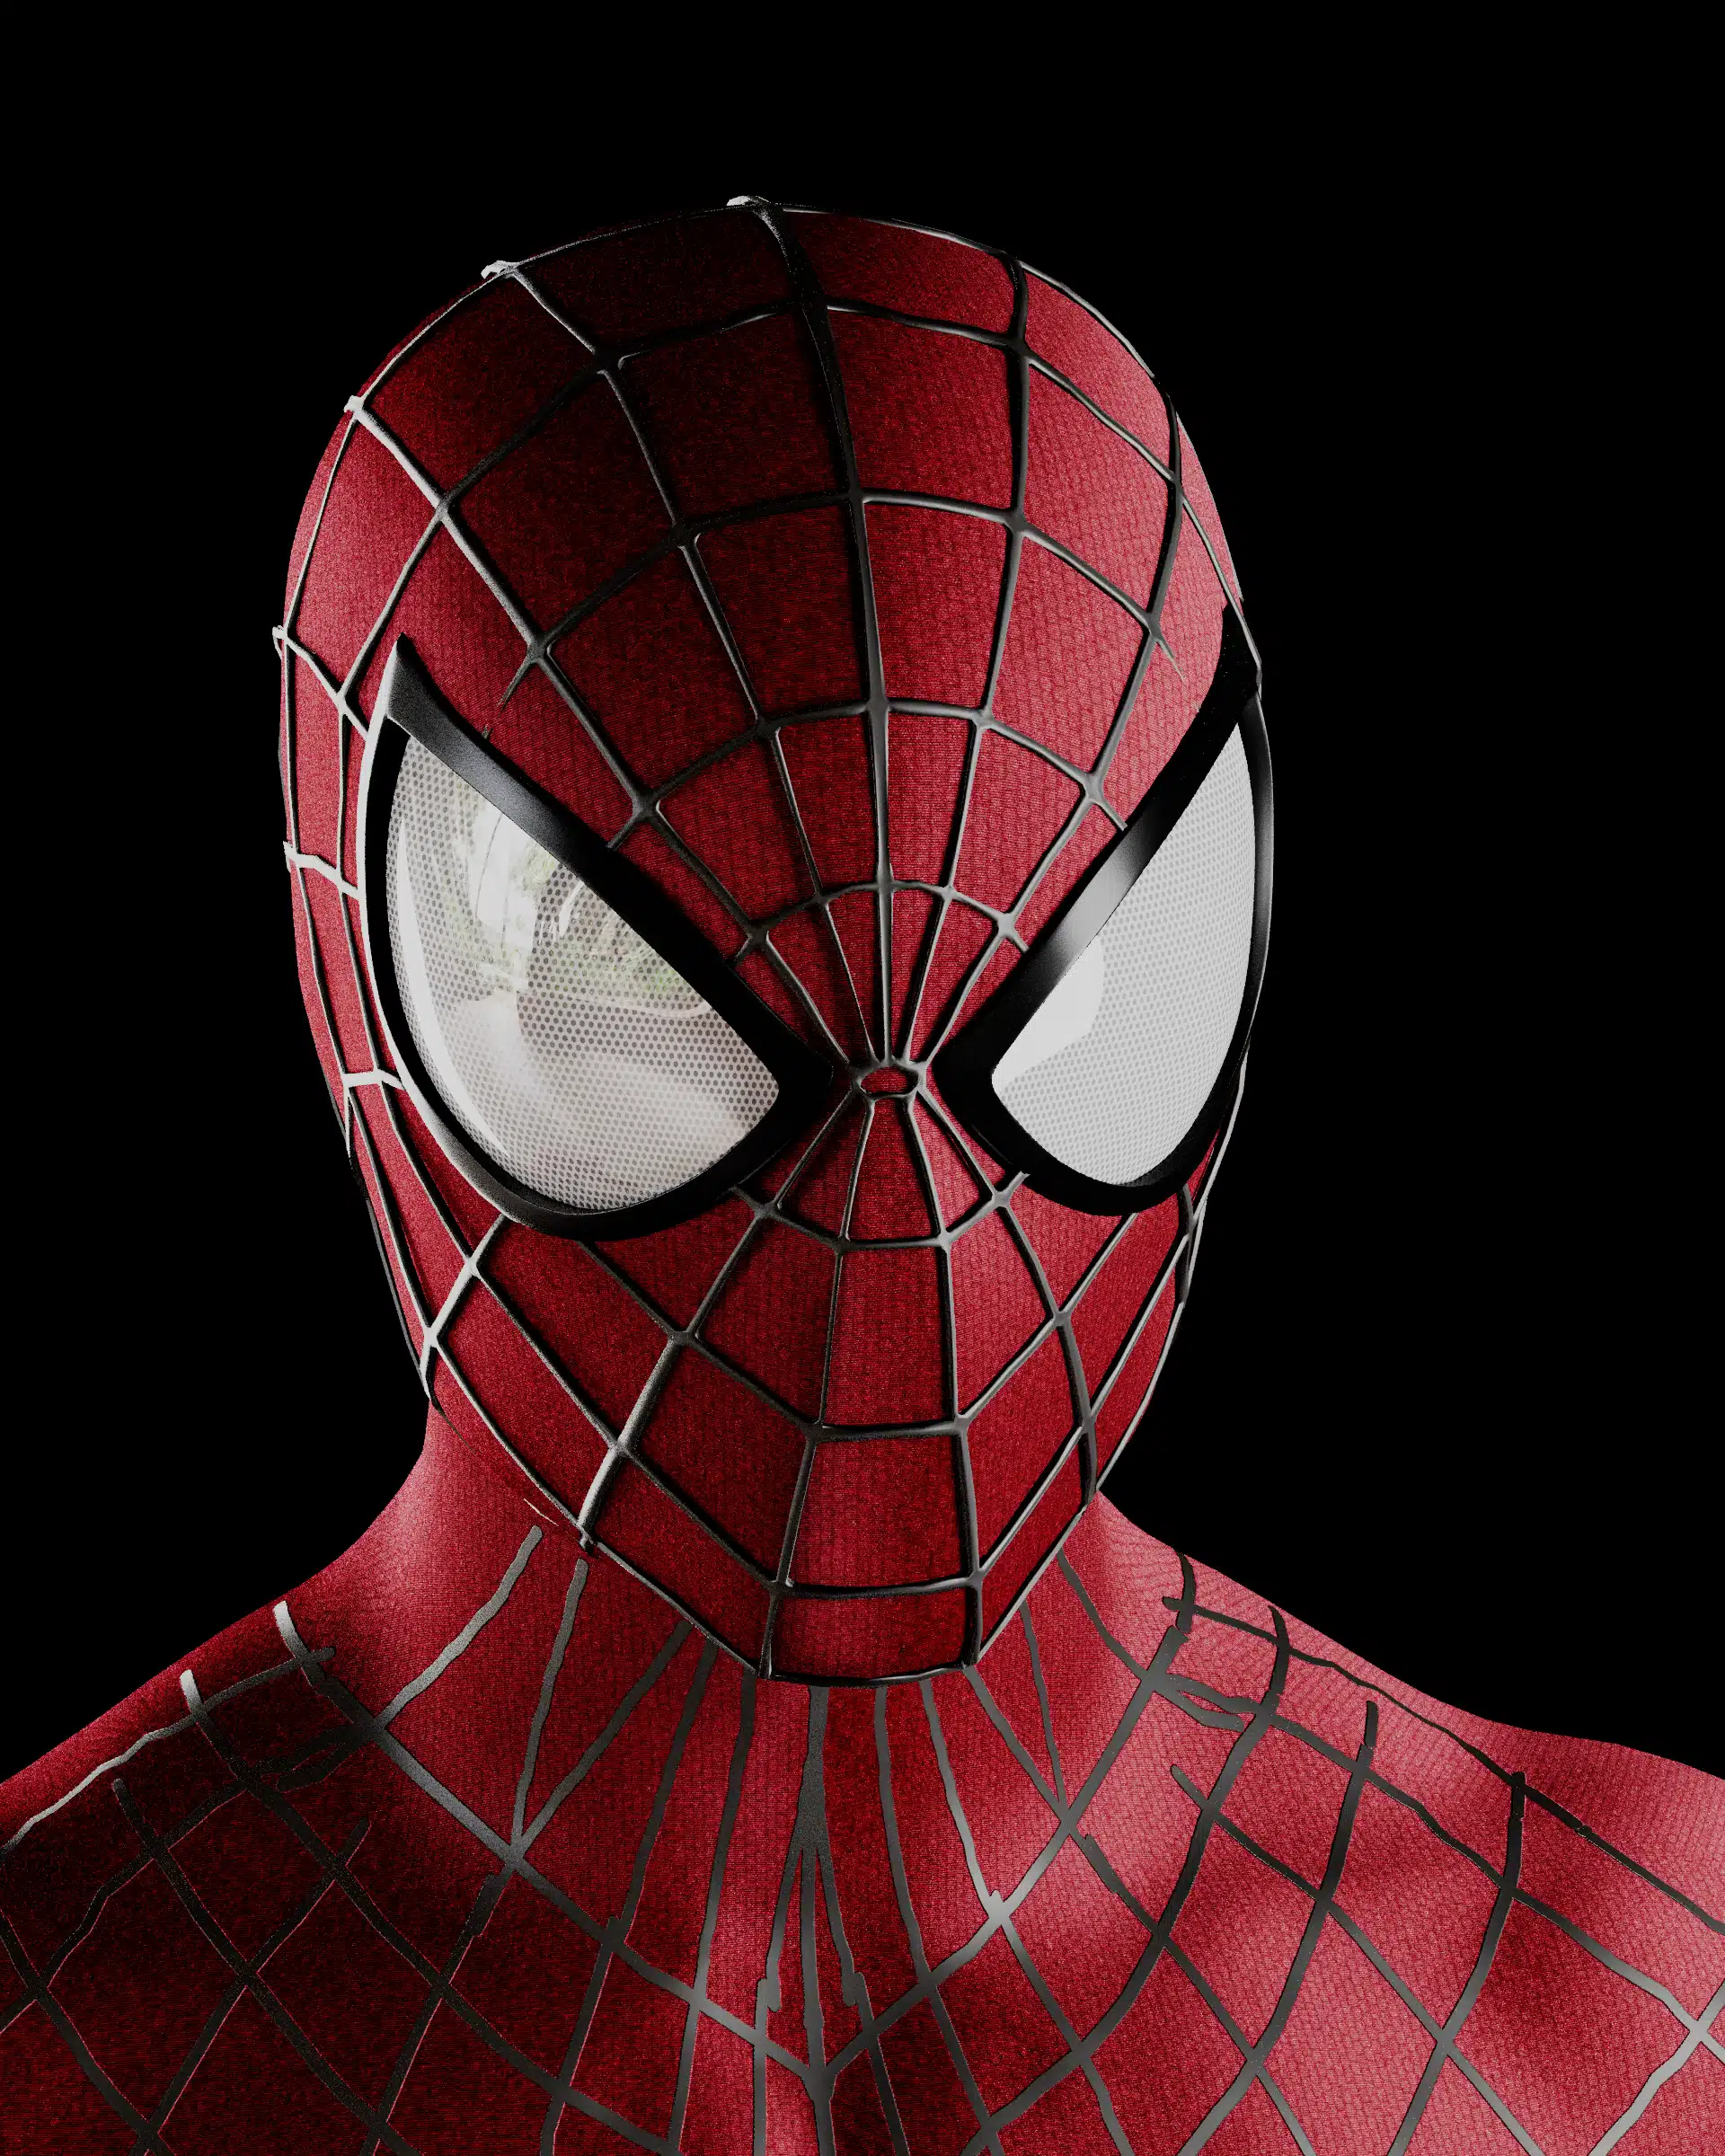 Marvel's Spider-Man Remastered PC Mods That We NEED 